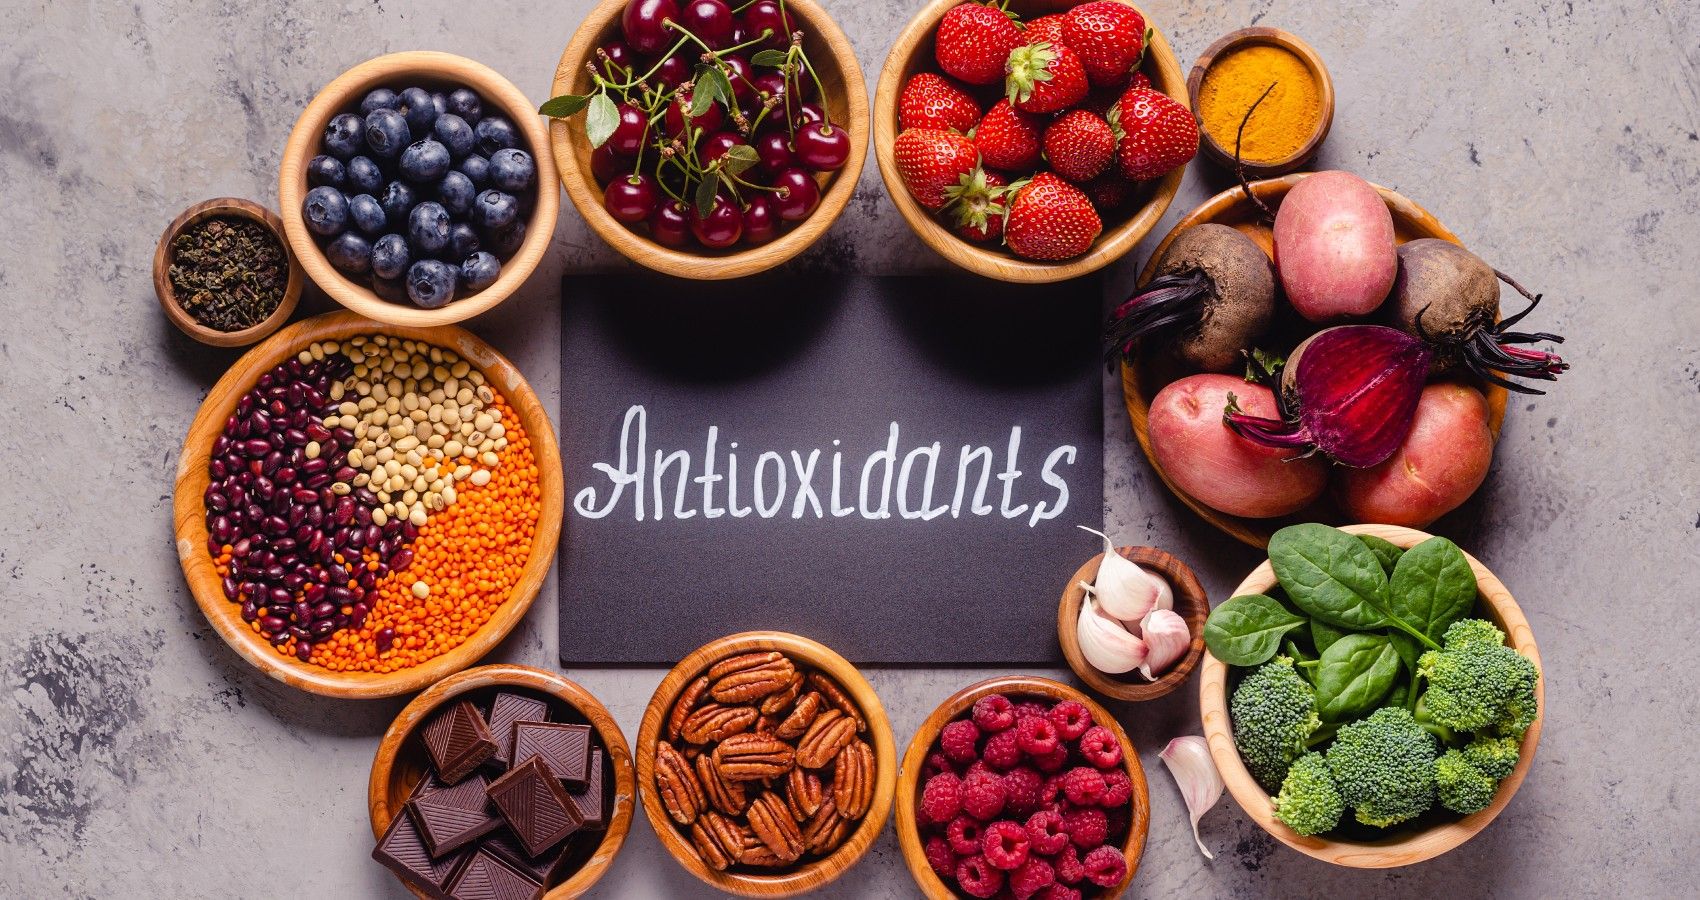 Photo of antioxidant-rich foods around a sign that says 